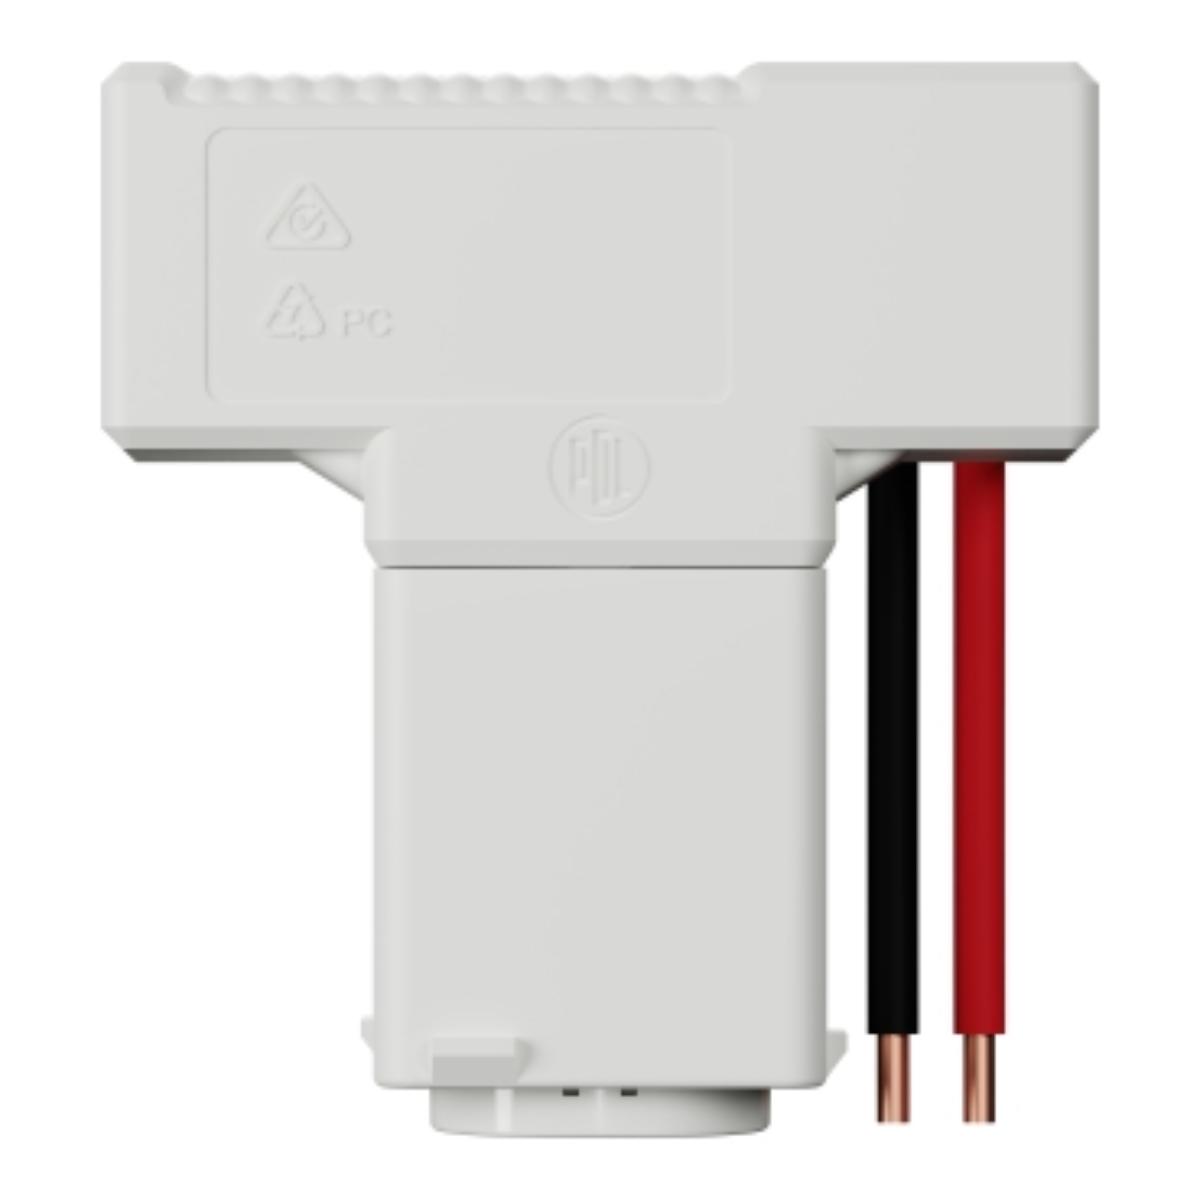 30 USB CHARGER TYPE A 1.5A 240V WHITE